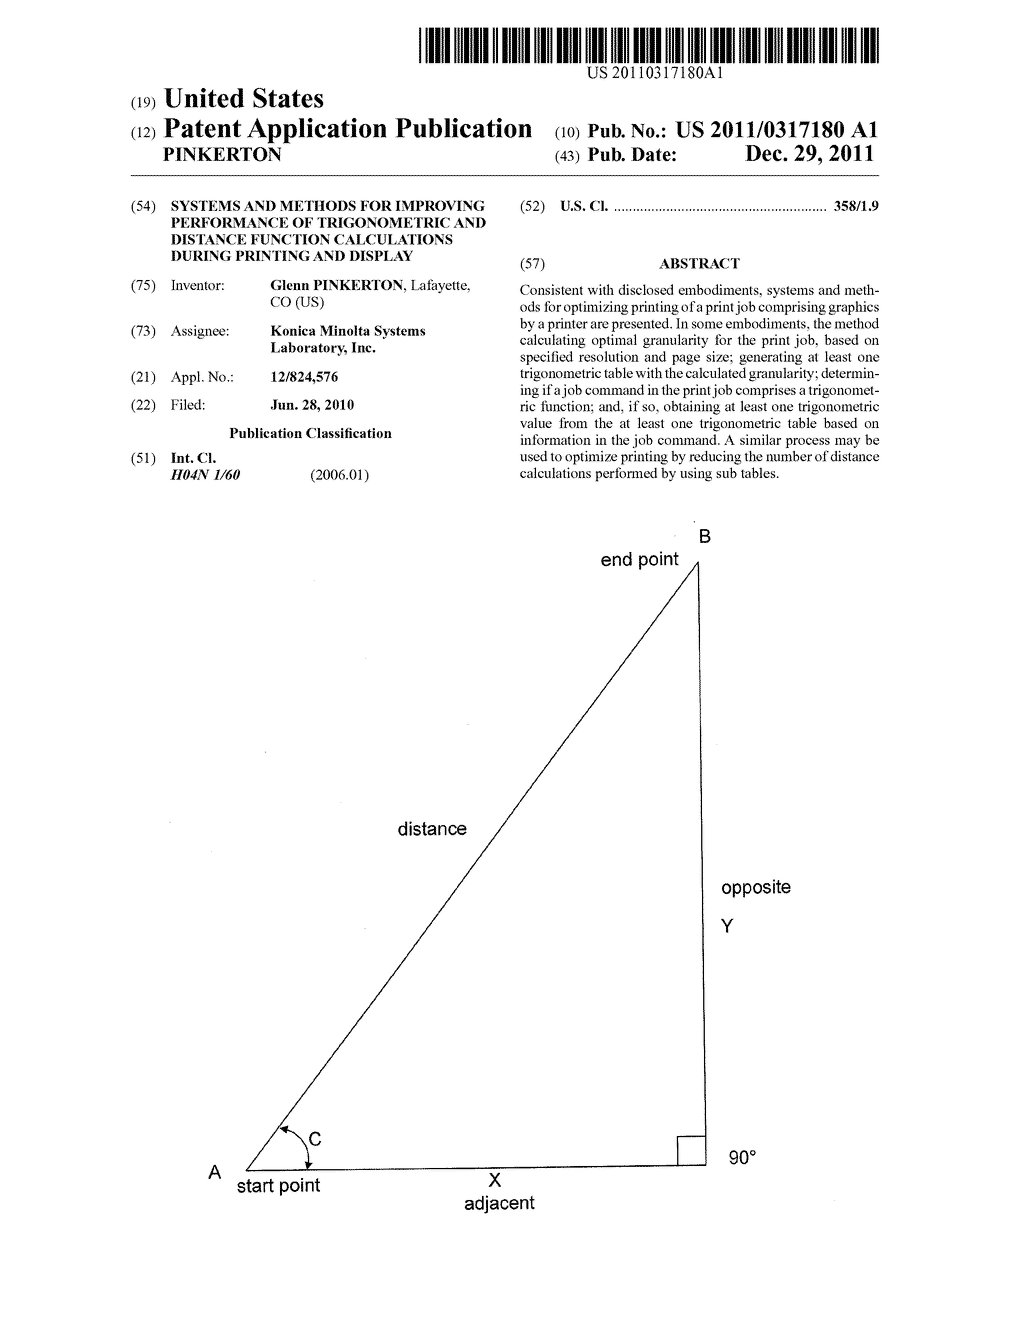 SYSTEMS AND METHODS FOR IMPROVING PERFORMANCE OF TRIGONOMETRIC AND     DISTANCE FUNCTION CALCULATIONS DURING PRINTING AND DISPLAY - diagram, schematic, and image 01